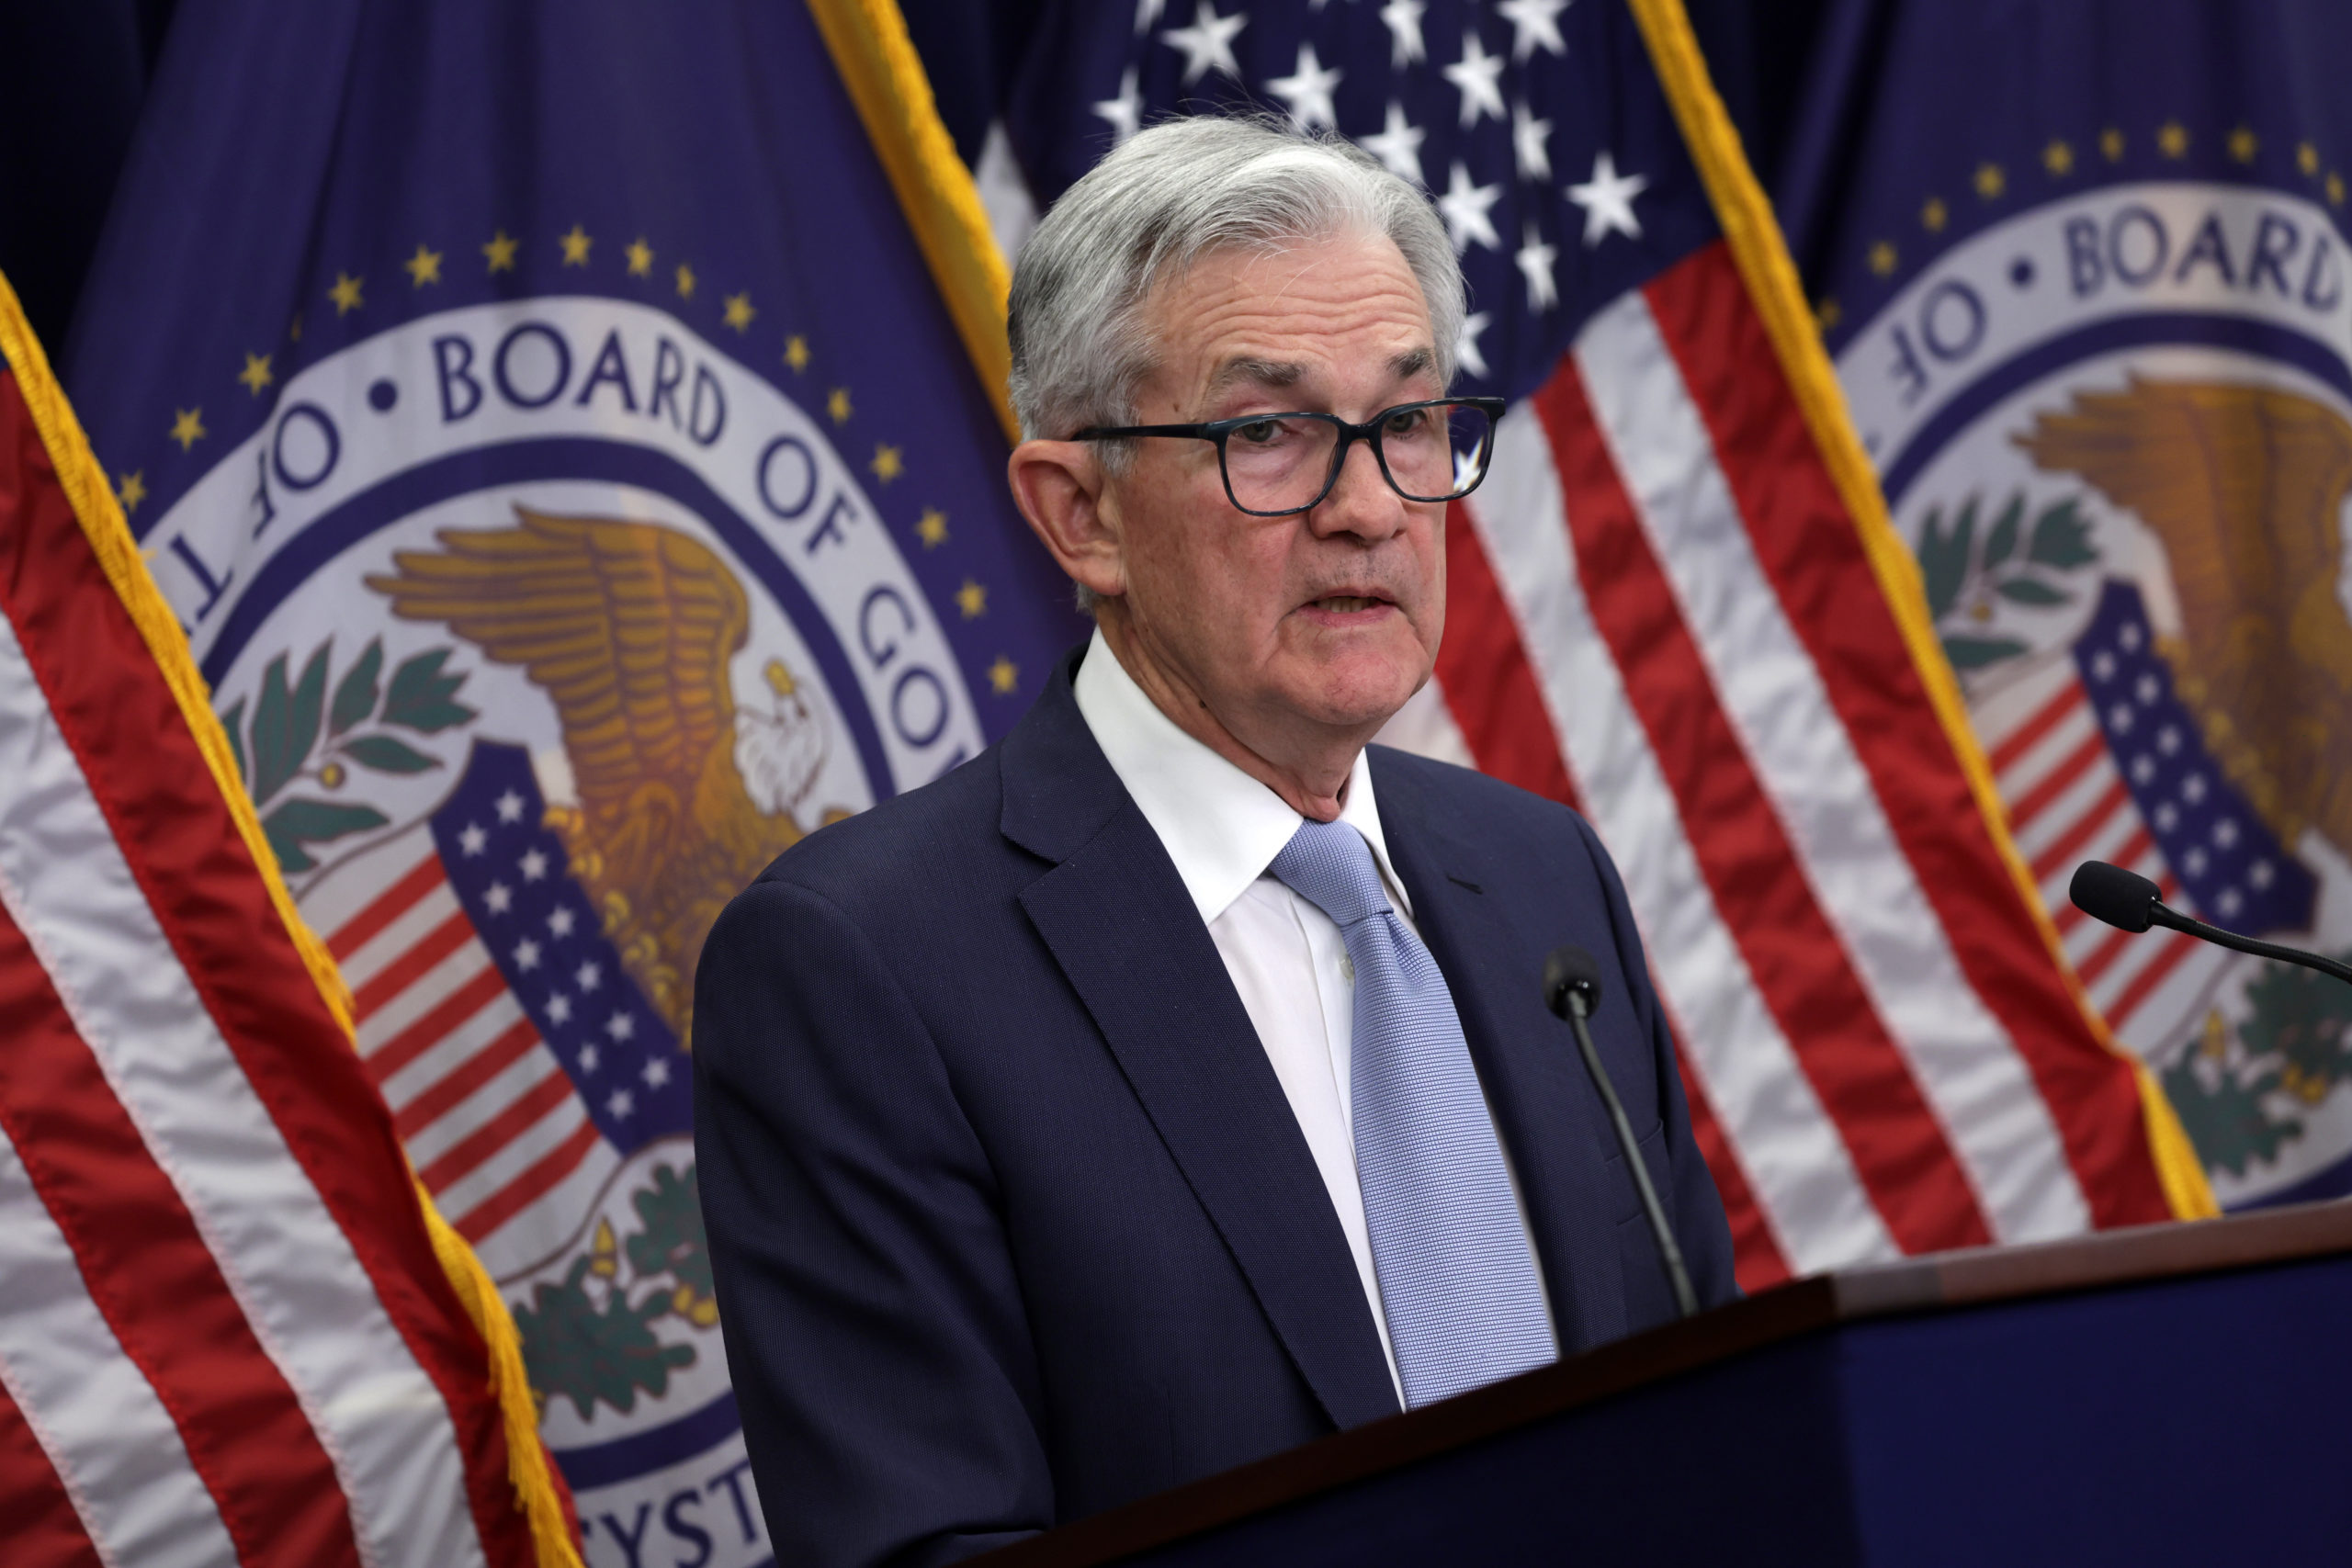 WASHINGTON, DC - DECEMBER 14: Federal Reserve Board Chairman Jerome Powell speaks during a news conference after a Federal Open Market Committee meeting on December 14, 2022 in Washington, DC. The Federal Reserve announced that it will raise interest rates by a 0.5 percentage point to 4.5. (Photo by Alex Wong/Getty Images)